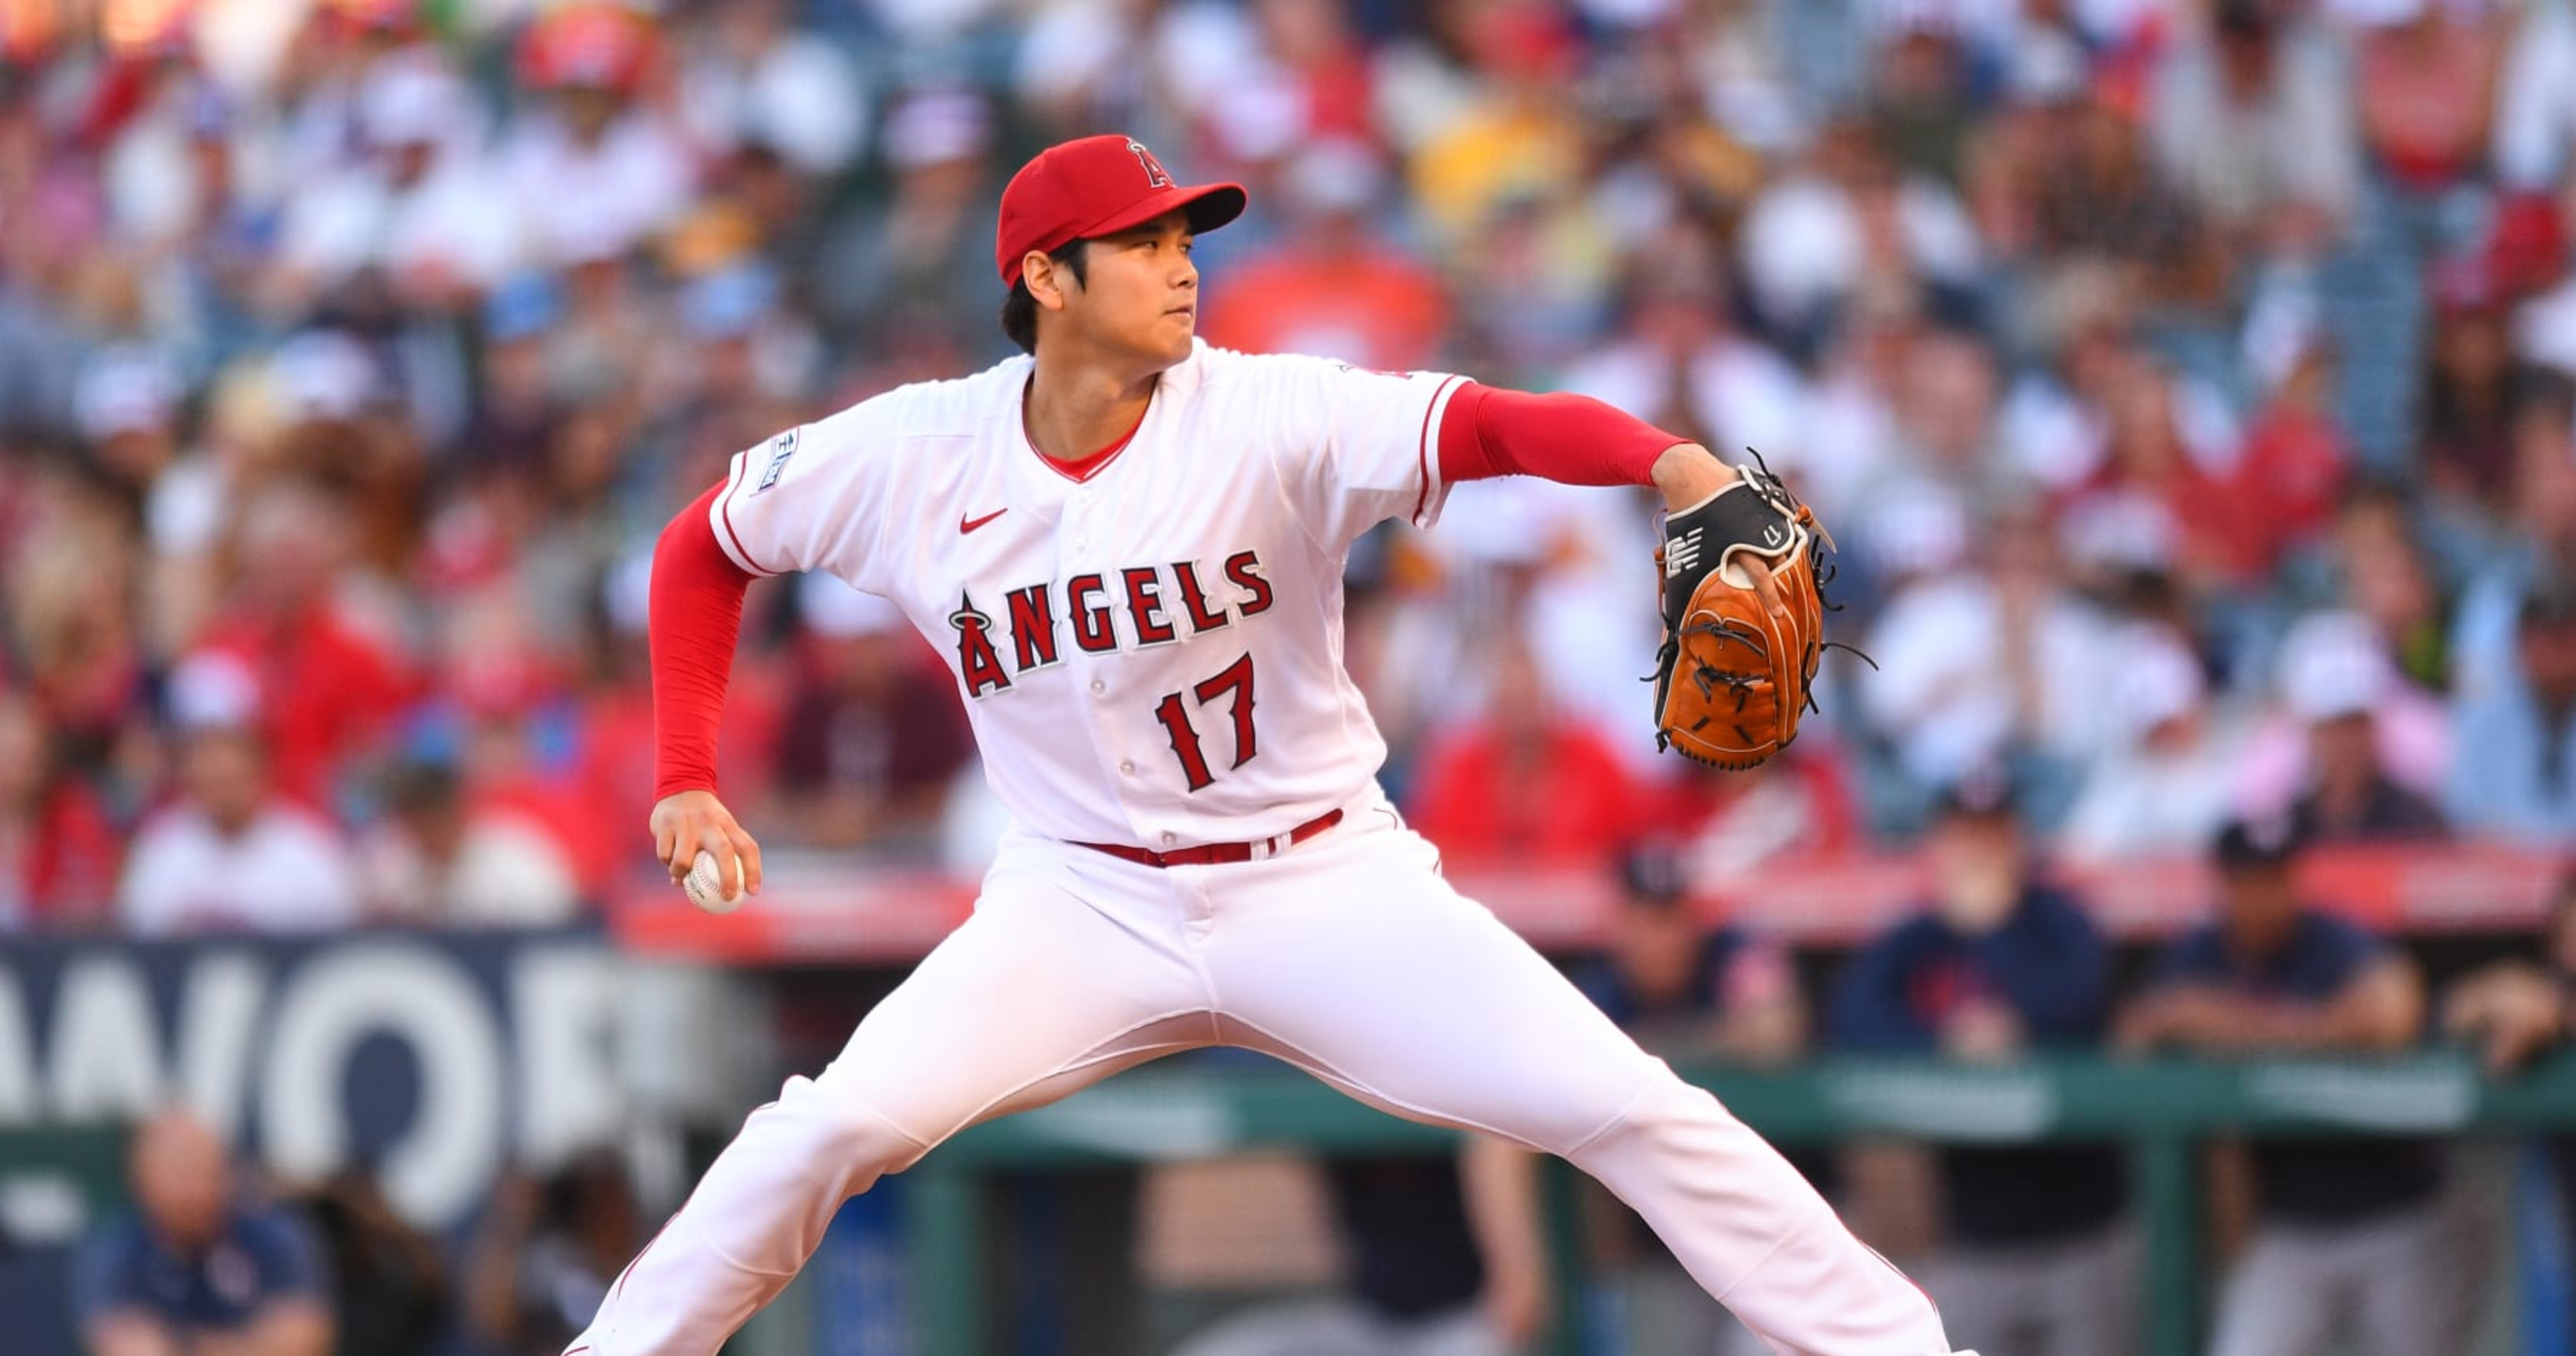 Shohei Ohtani allows 4 earned runs, takes the loss in the Astros' 7-5